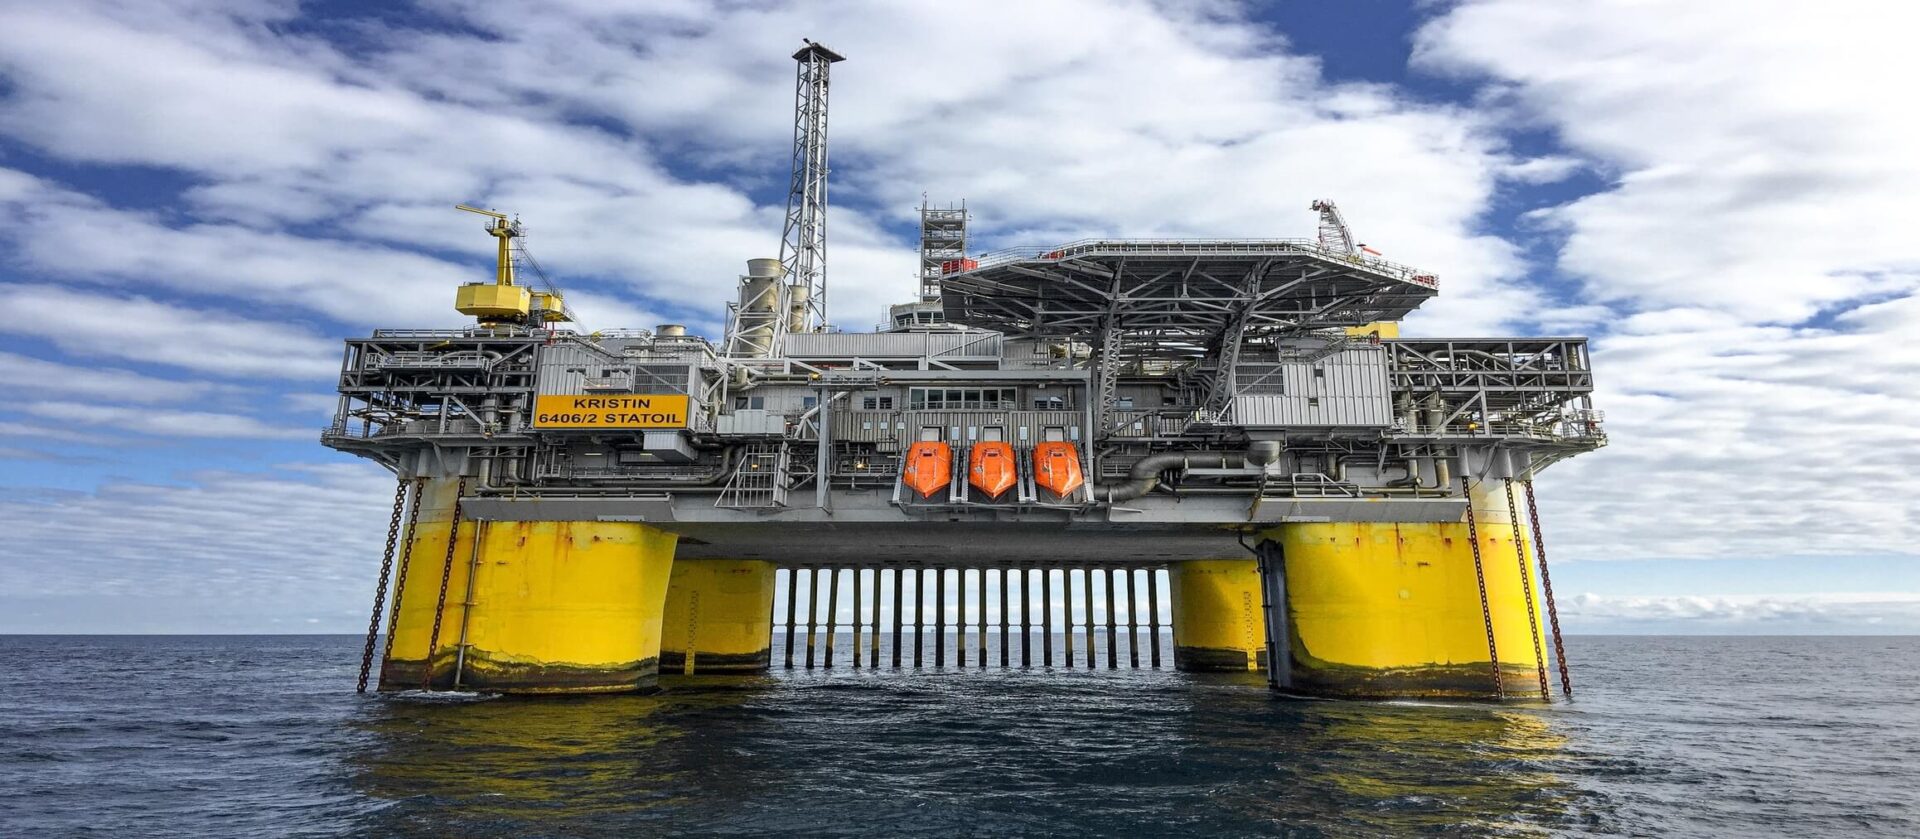 panoramic view of an offshore oil and gas rig